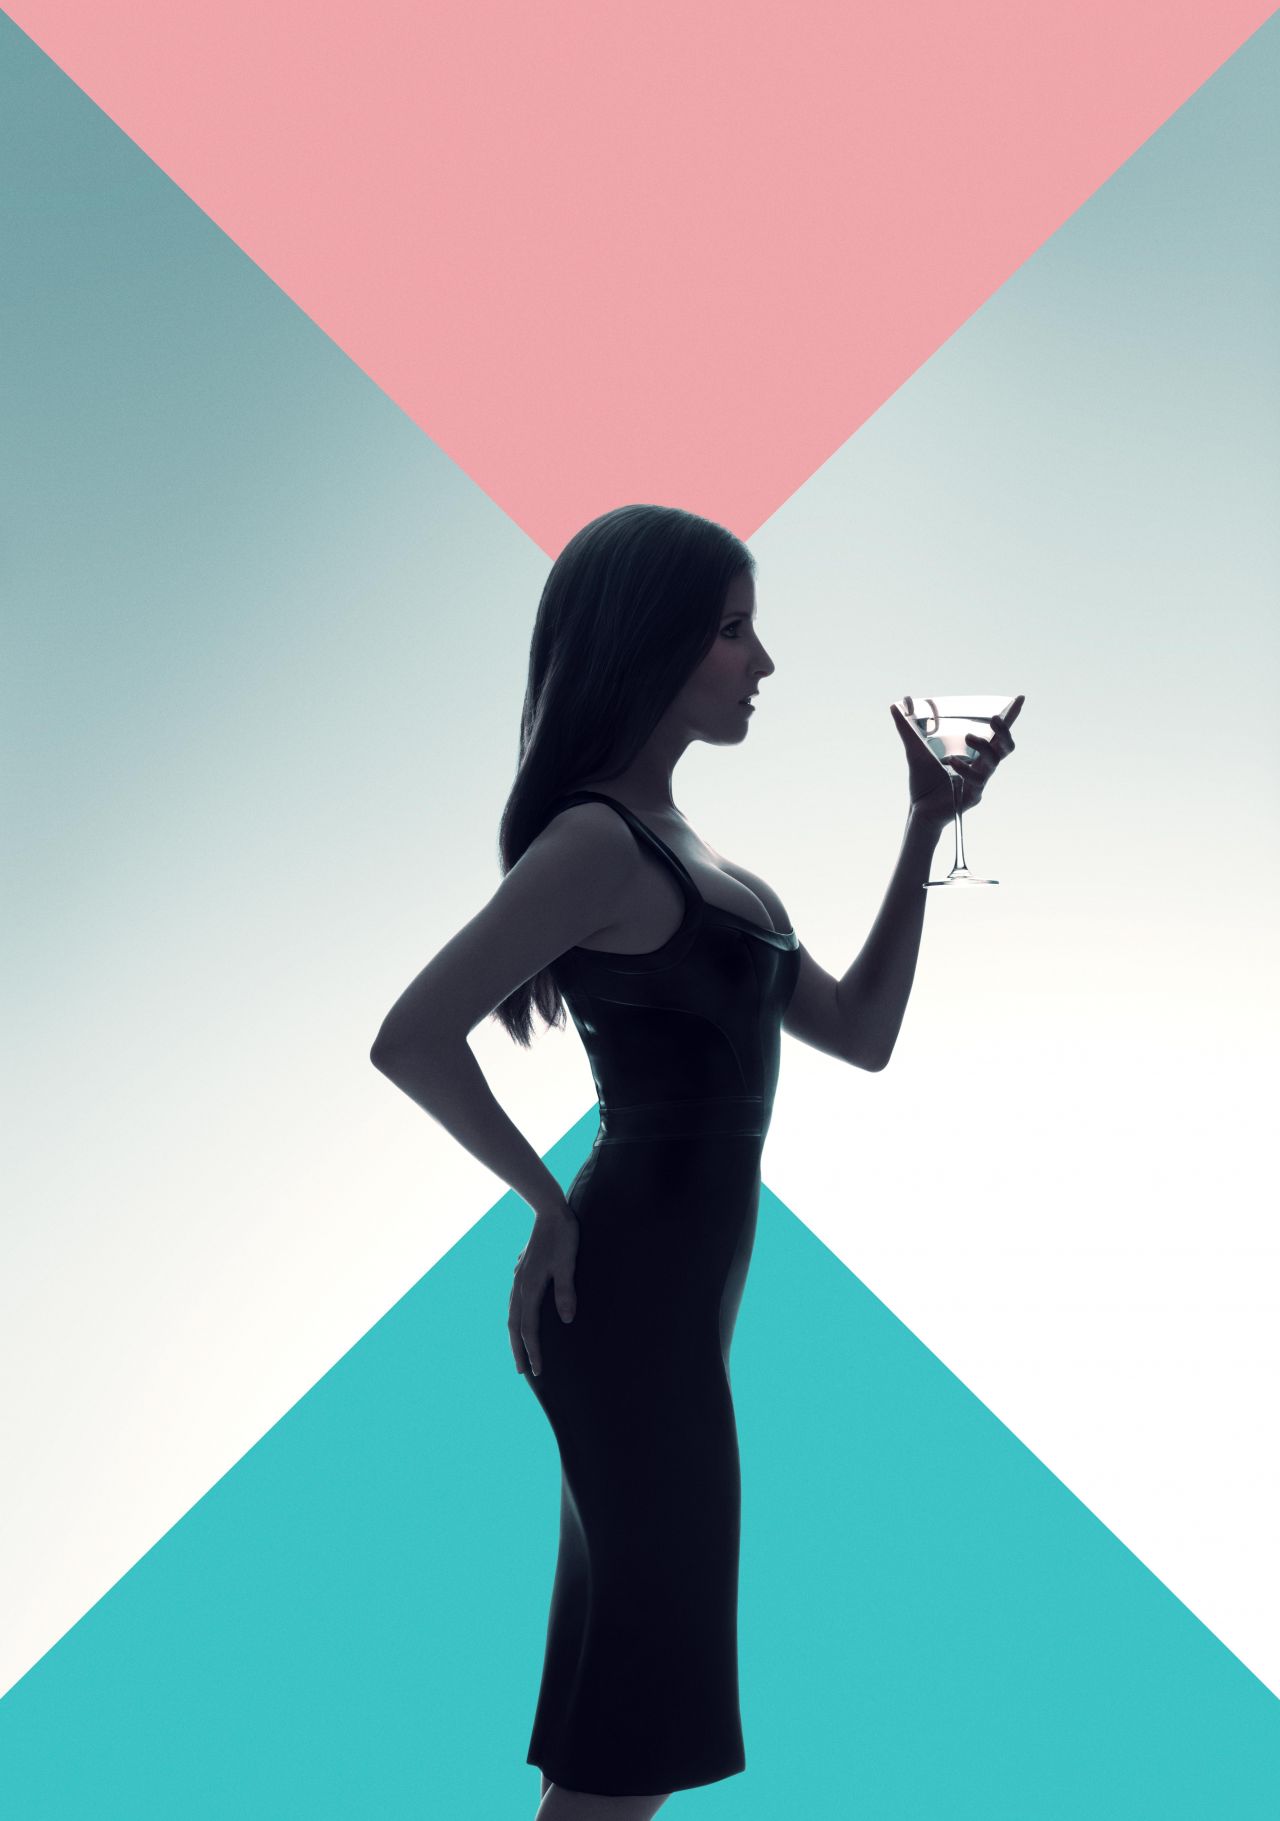 Anna Kendrick and Blake Lively - "A Simple Favor" Photos and Posters